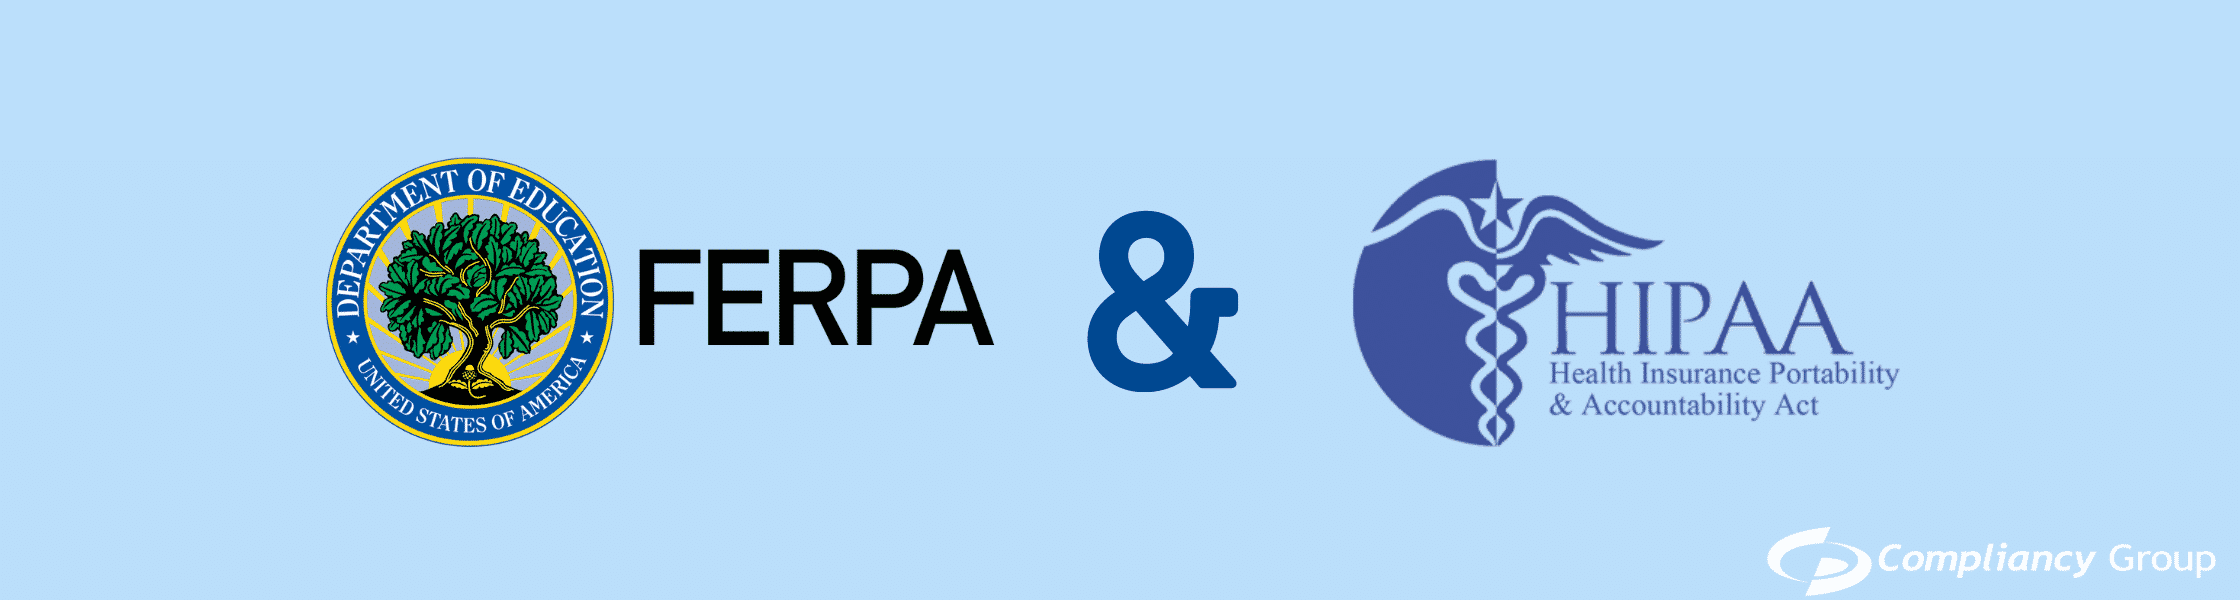 How Do FERPA and HIPAA Interact?